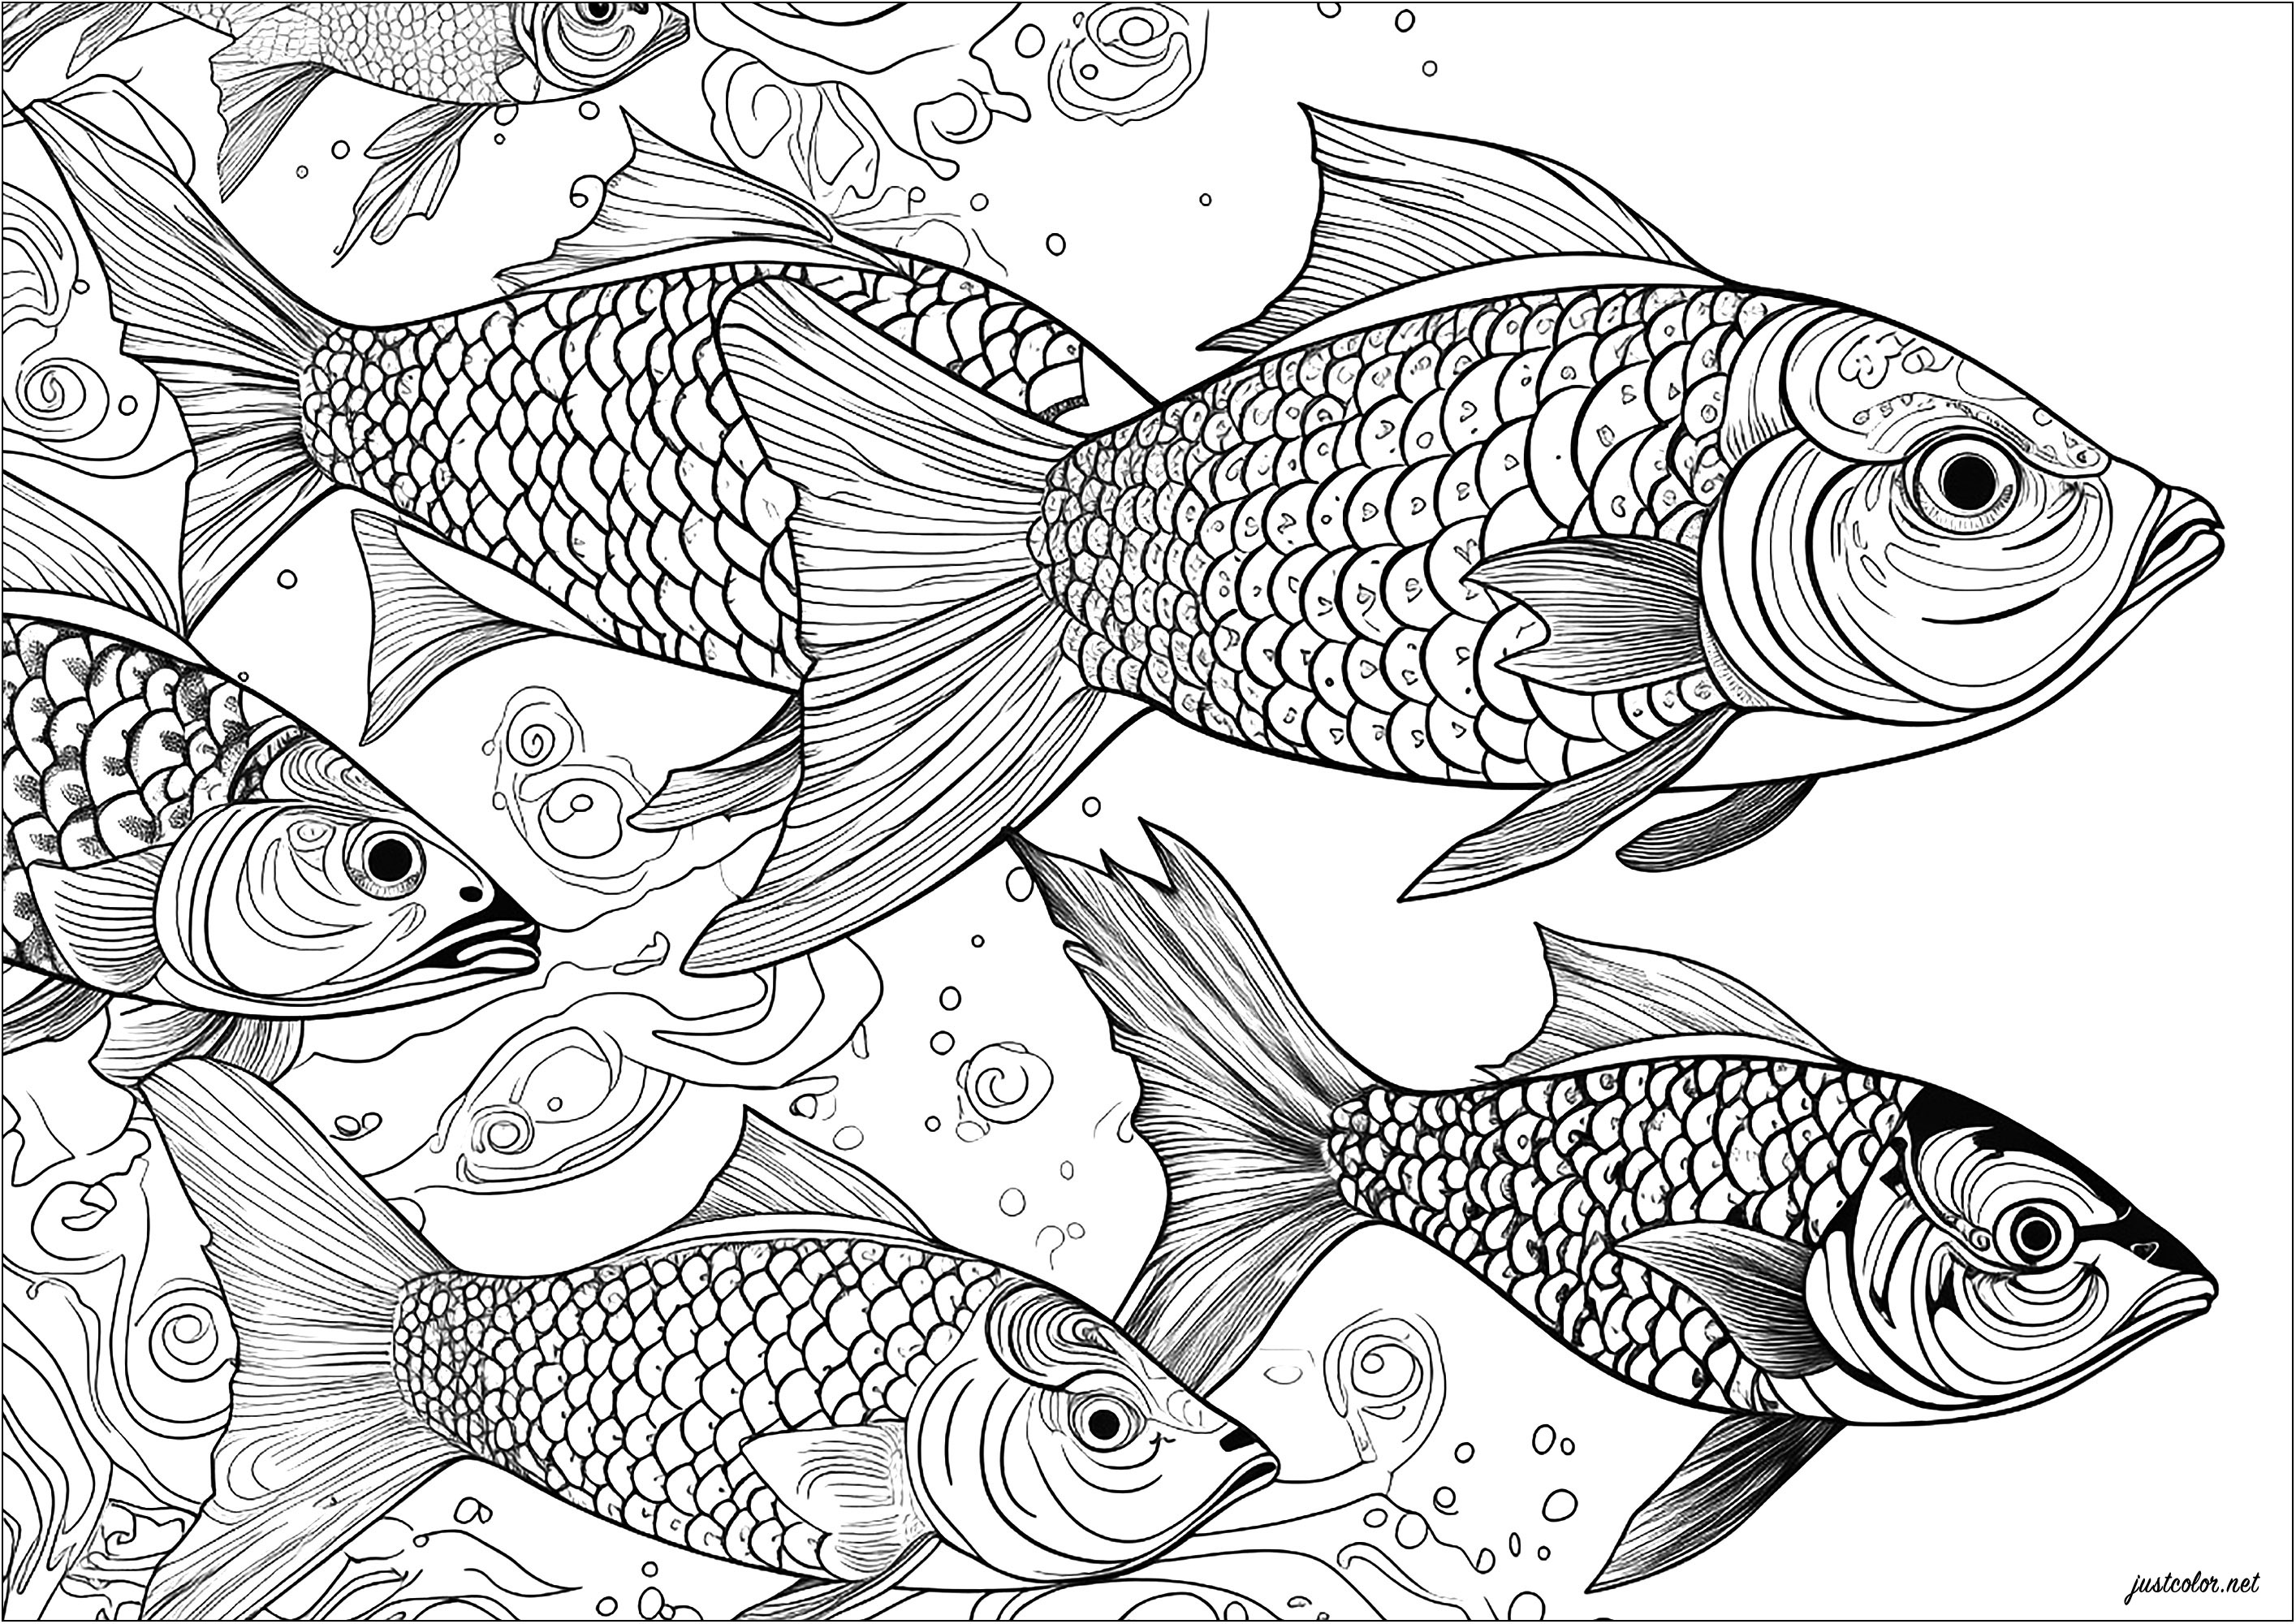 Several fish swimming peacefully. Lots of details to color